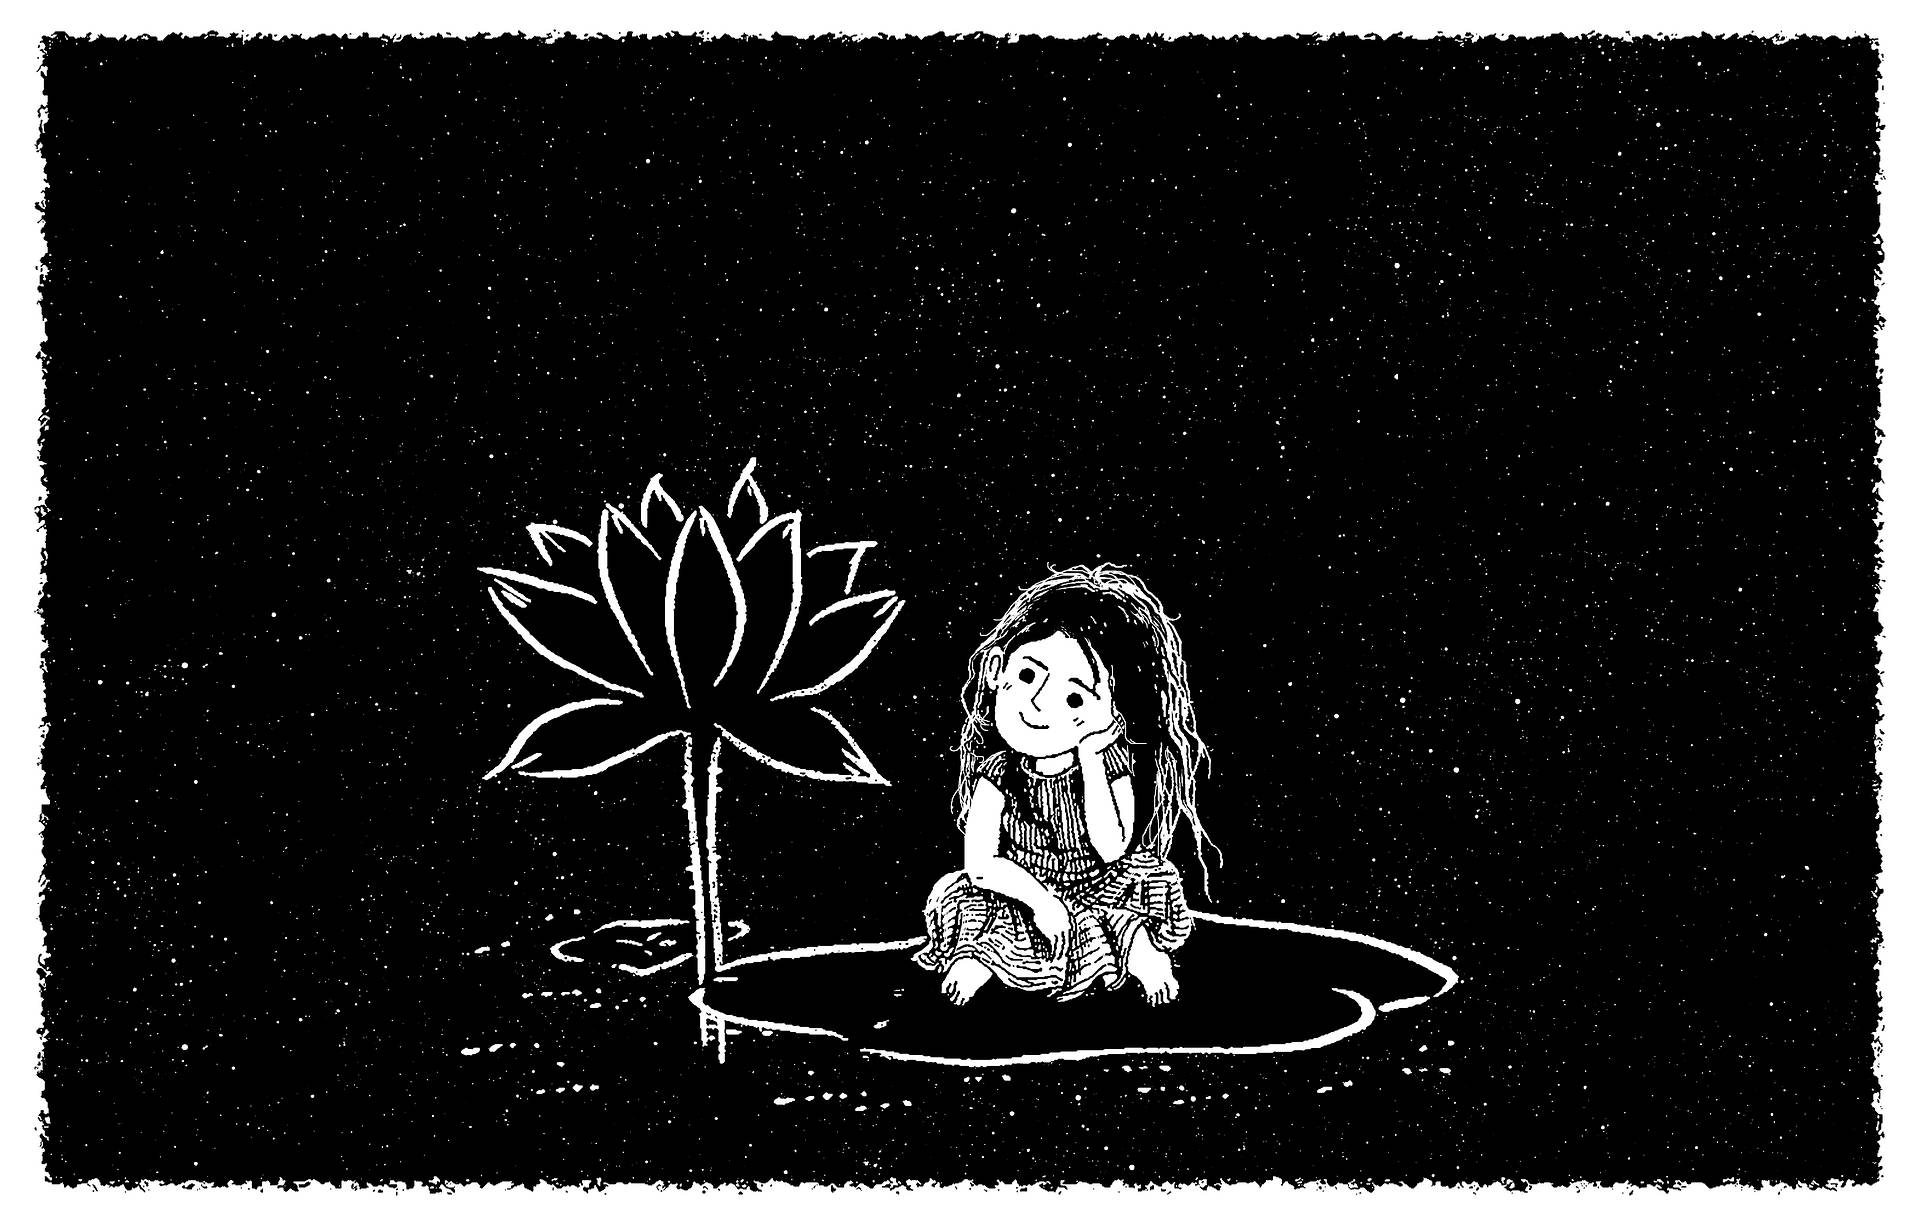 black and white sketch of a girl sitting on the ground looking contently at a large flower